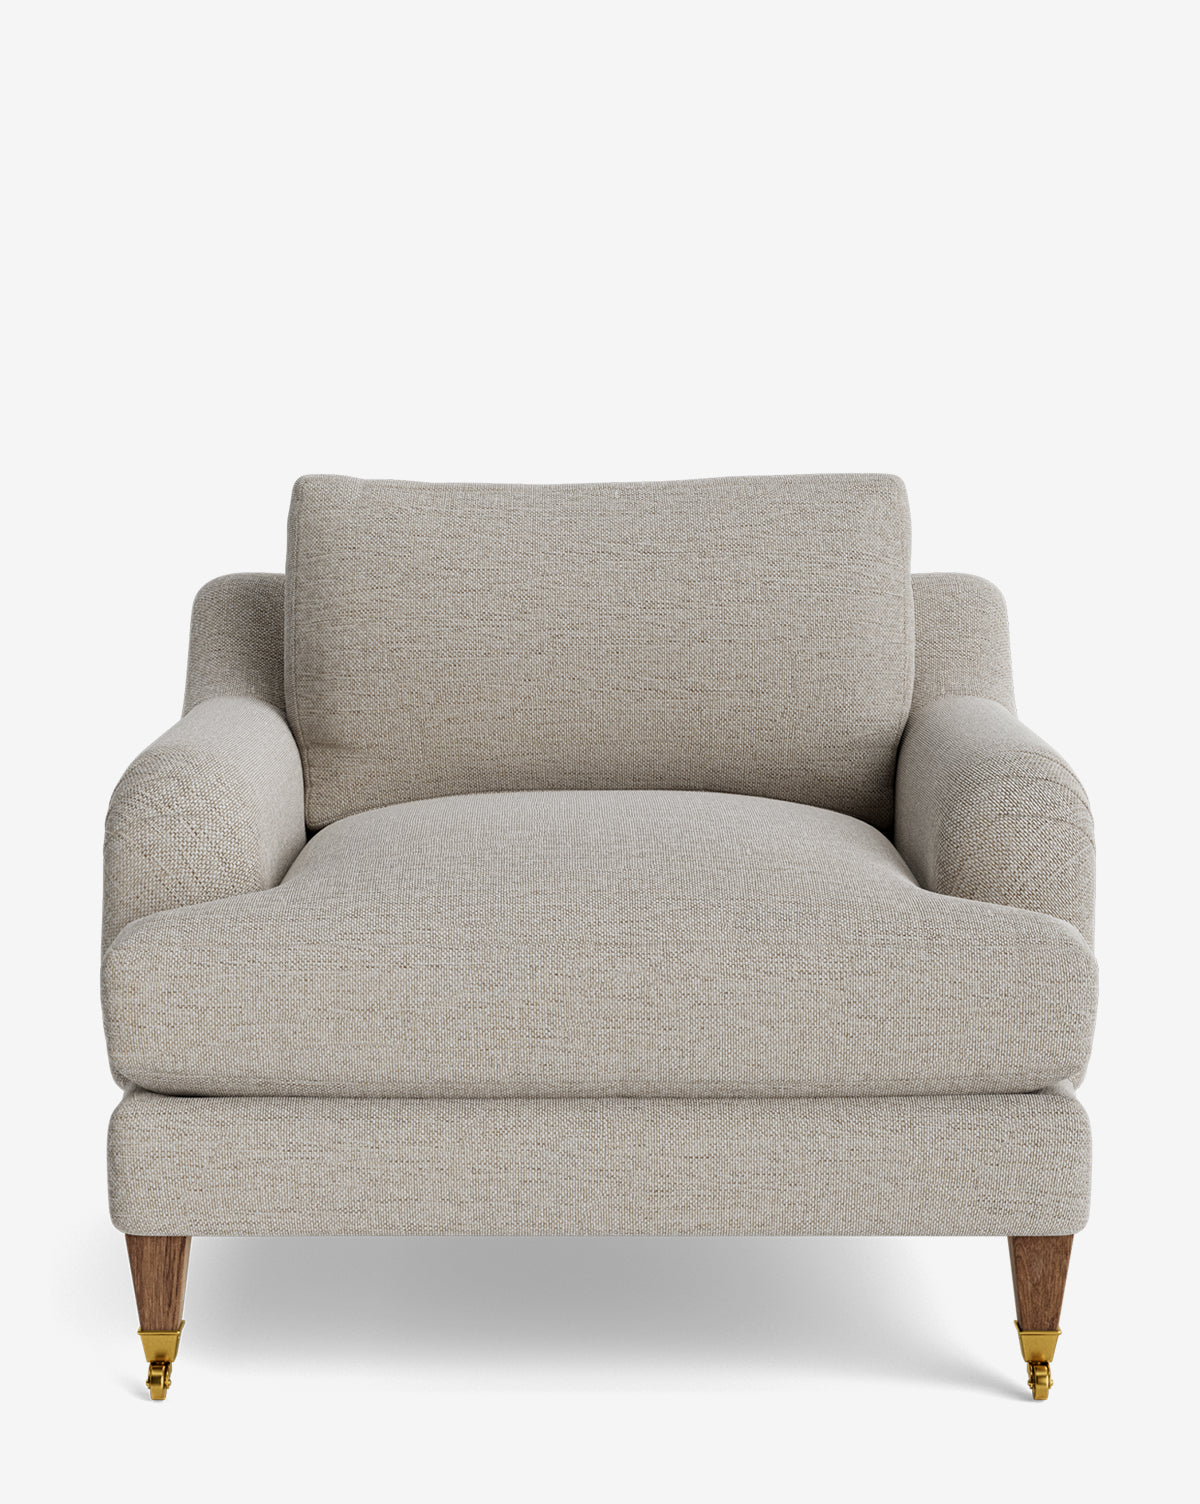 Community, Lucille English Roll Arm Chair